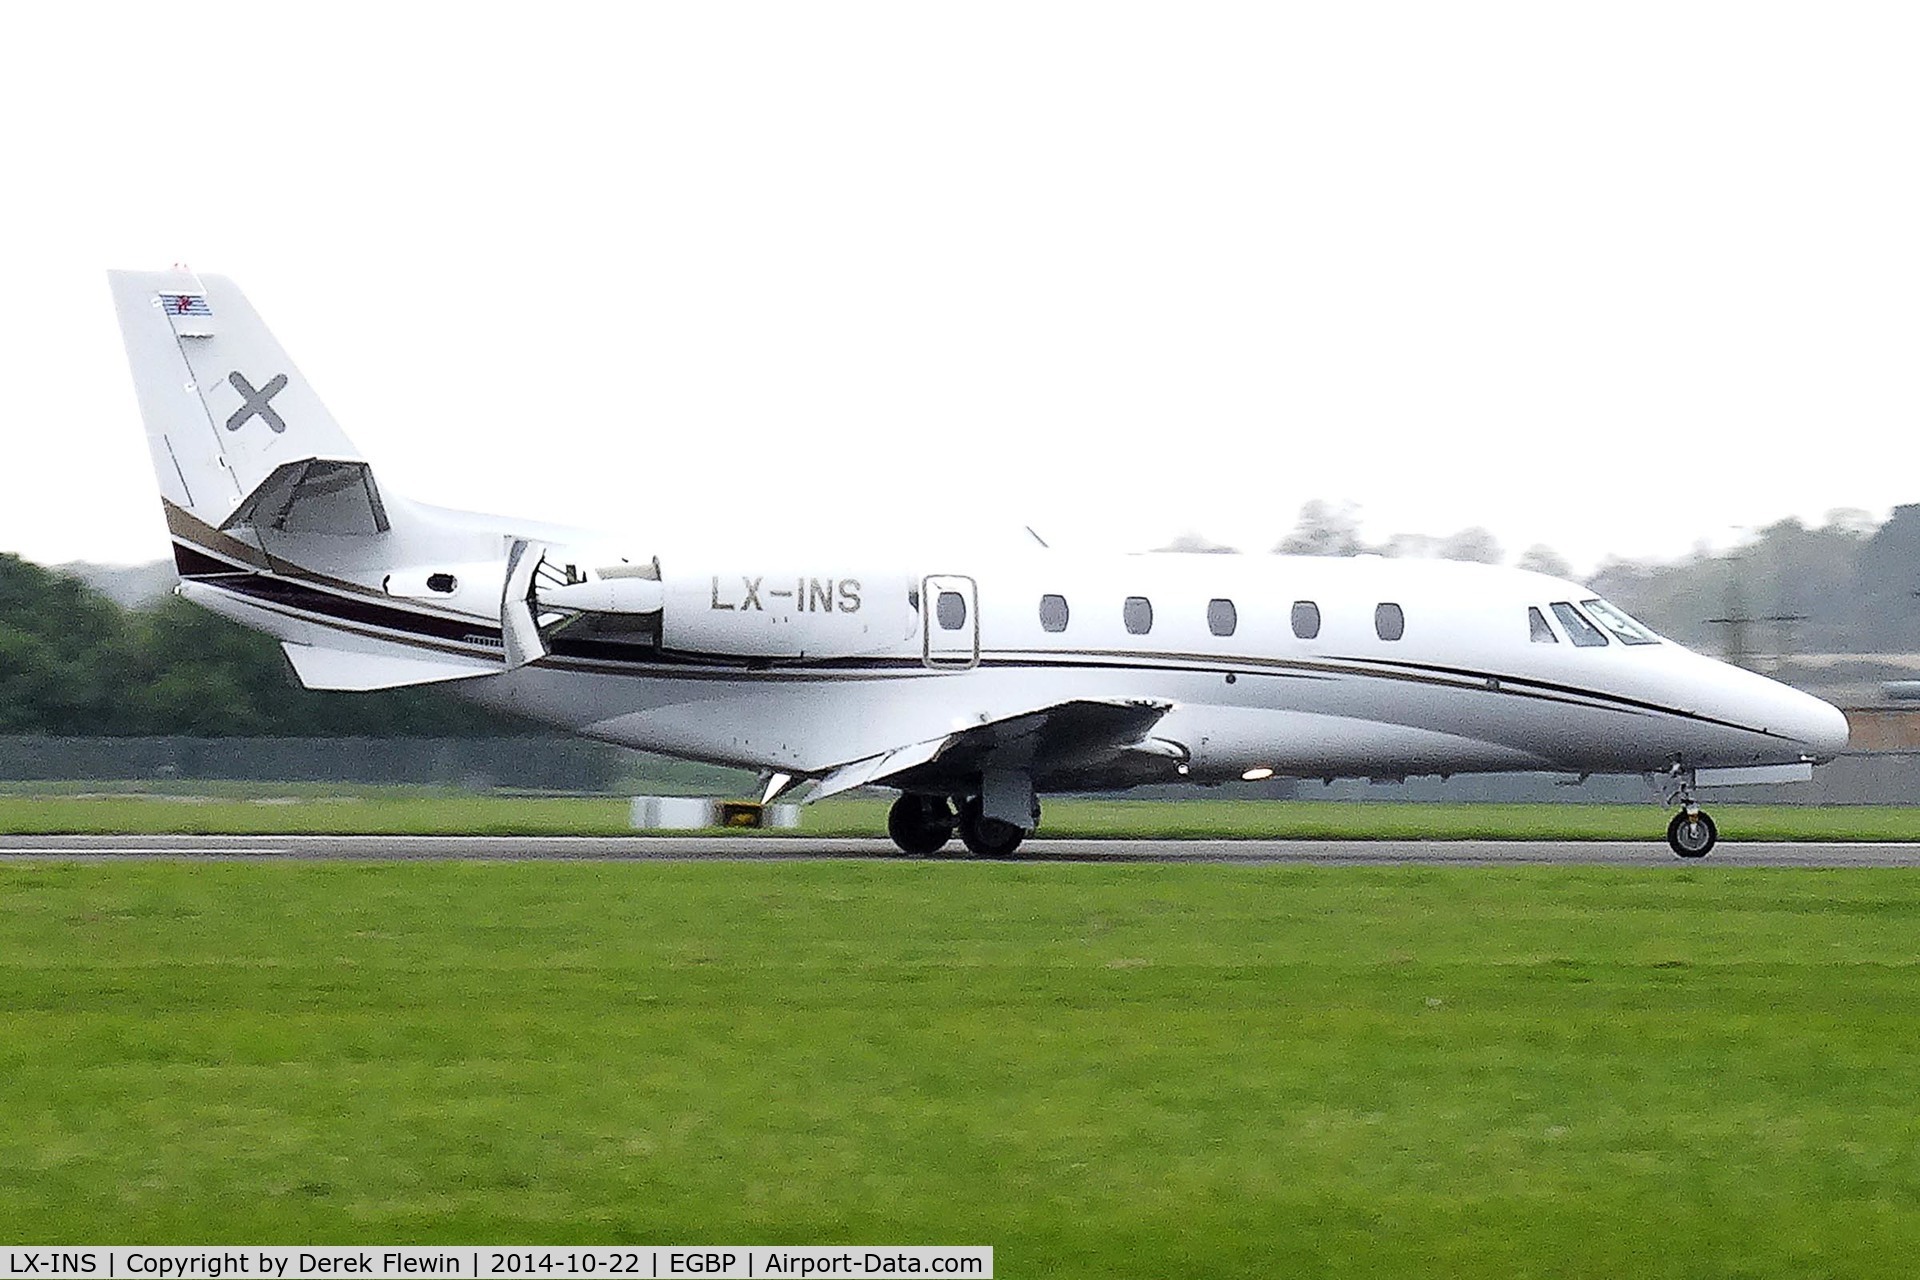 LX-INS, 2007 Cessna 560 Citation Excel C/N 560-5727, Visiting Citation, Luxembourg based, previously N5192E, VH-NGA, seen shortly after landing on runway 26 at EGBP.